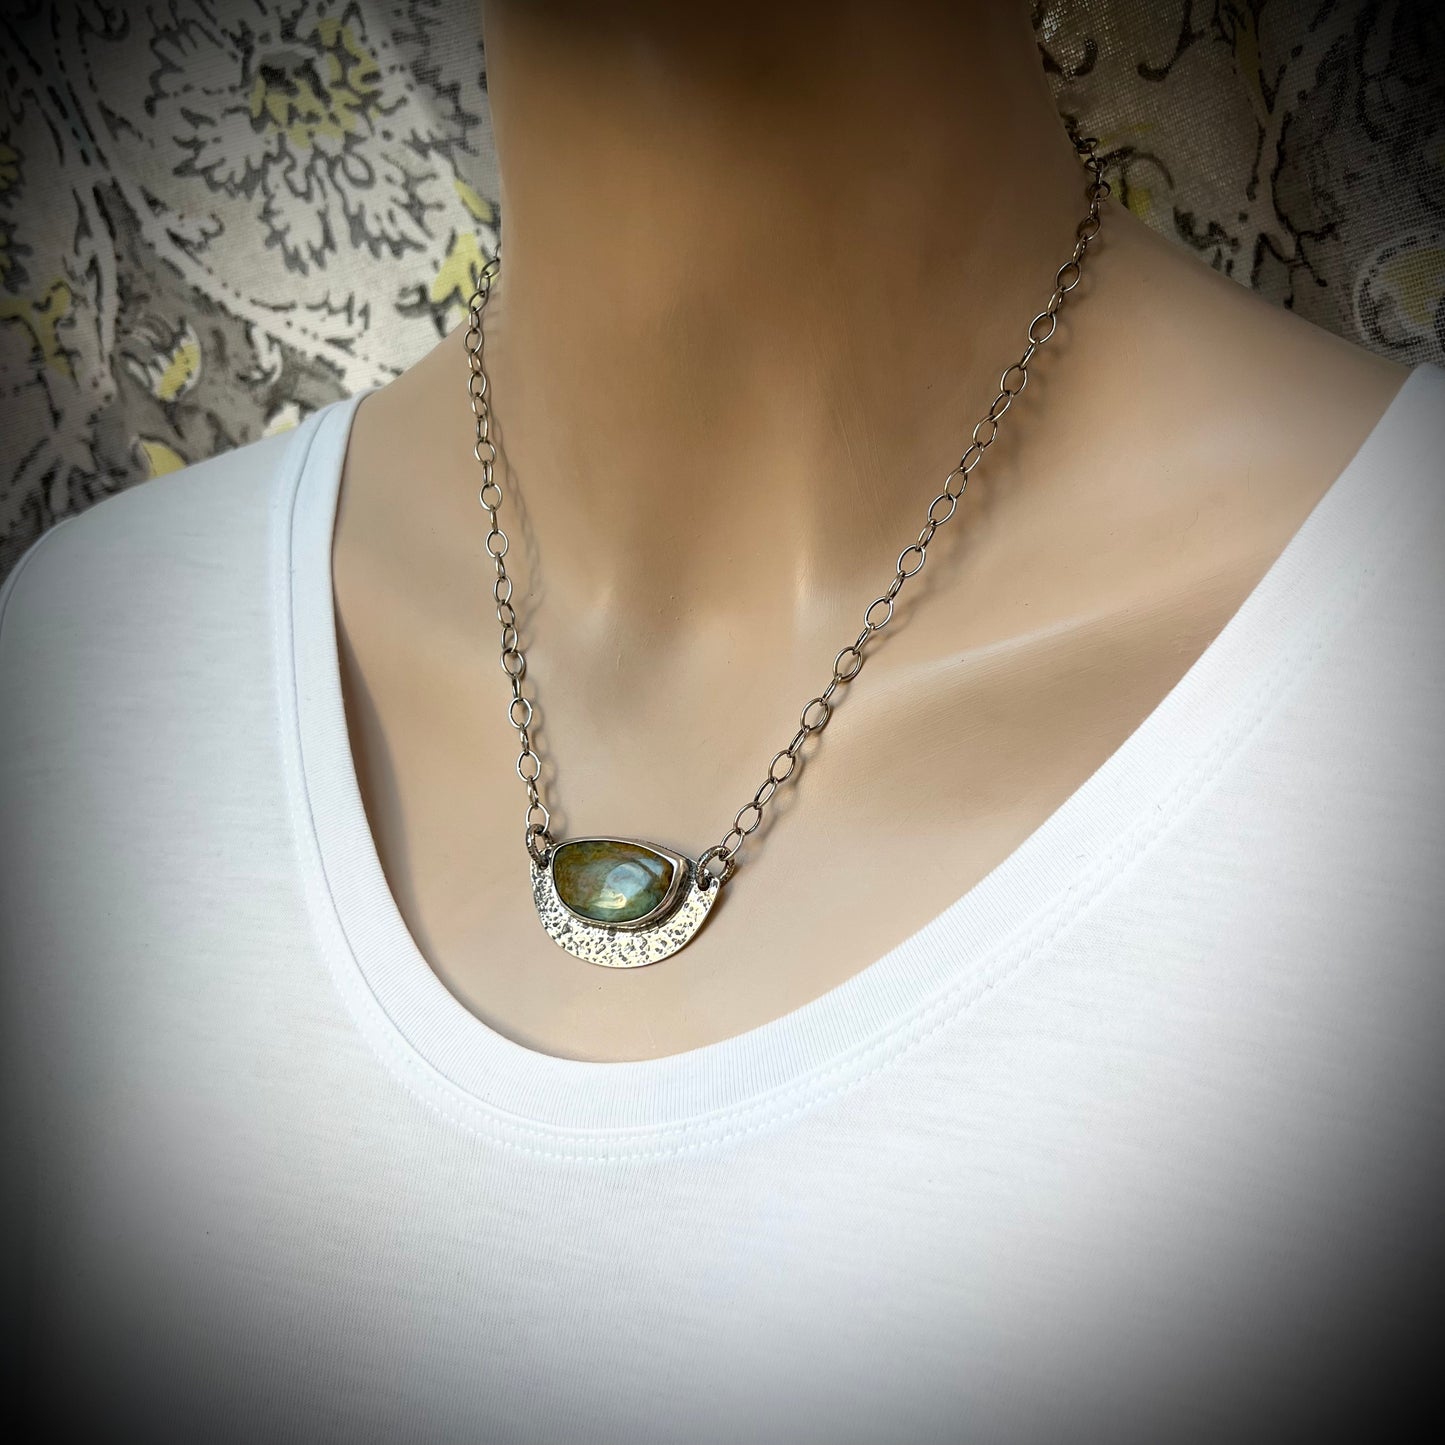 Peruvian Opal Sterling Silver Necklace - Handmade One-of-a-kind Pendant on Sterling Silver Chain